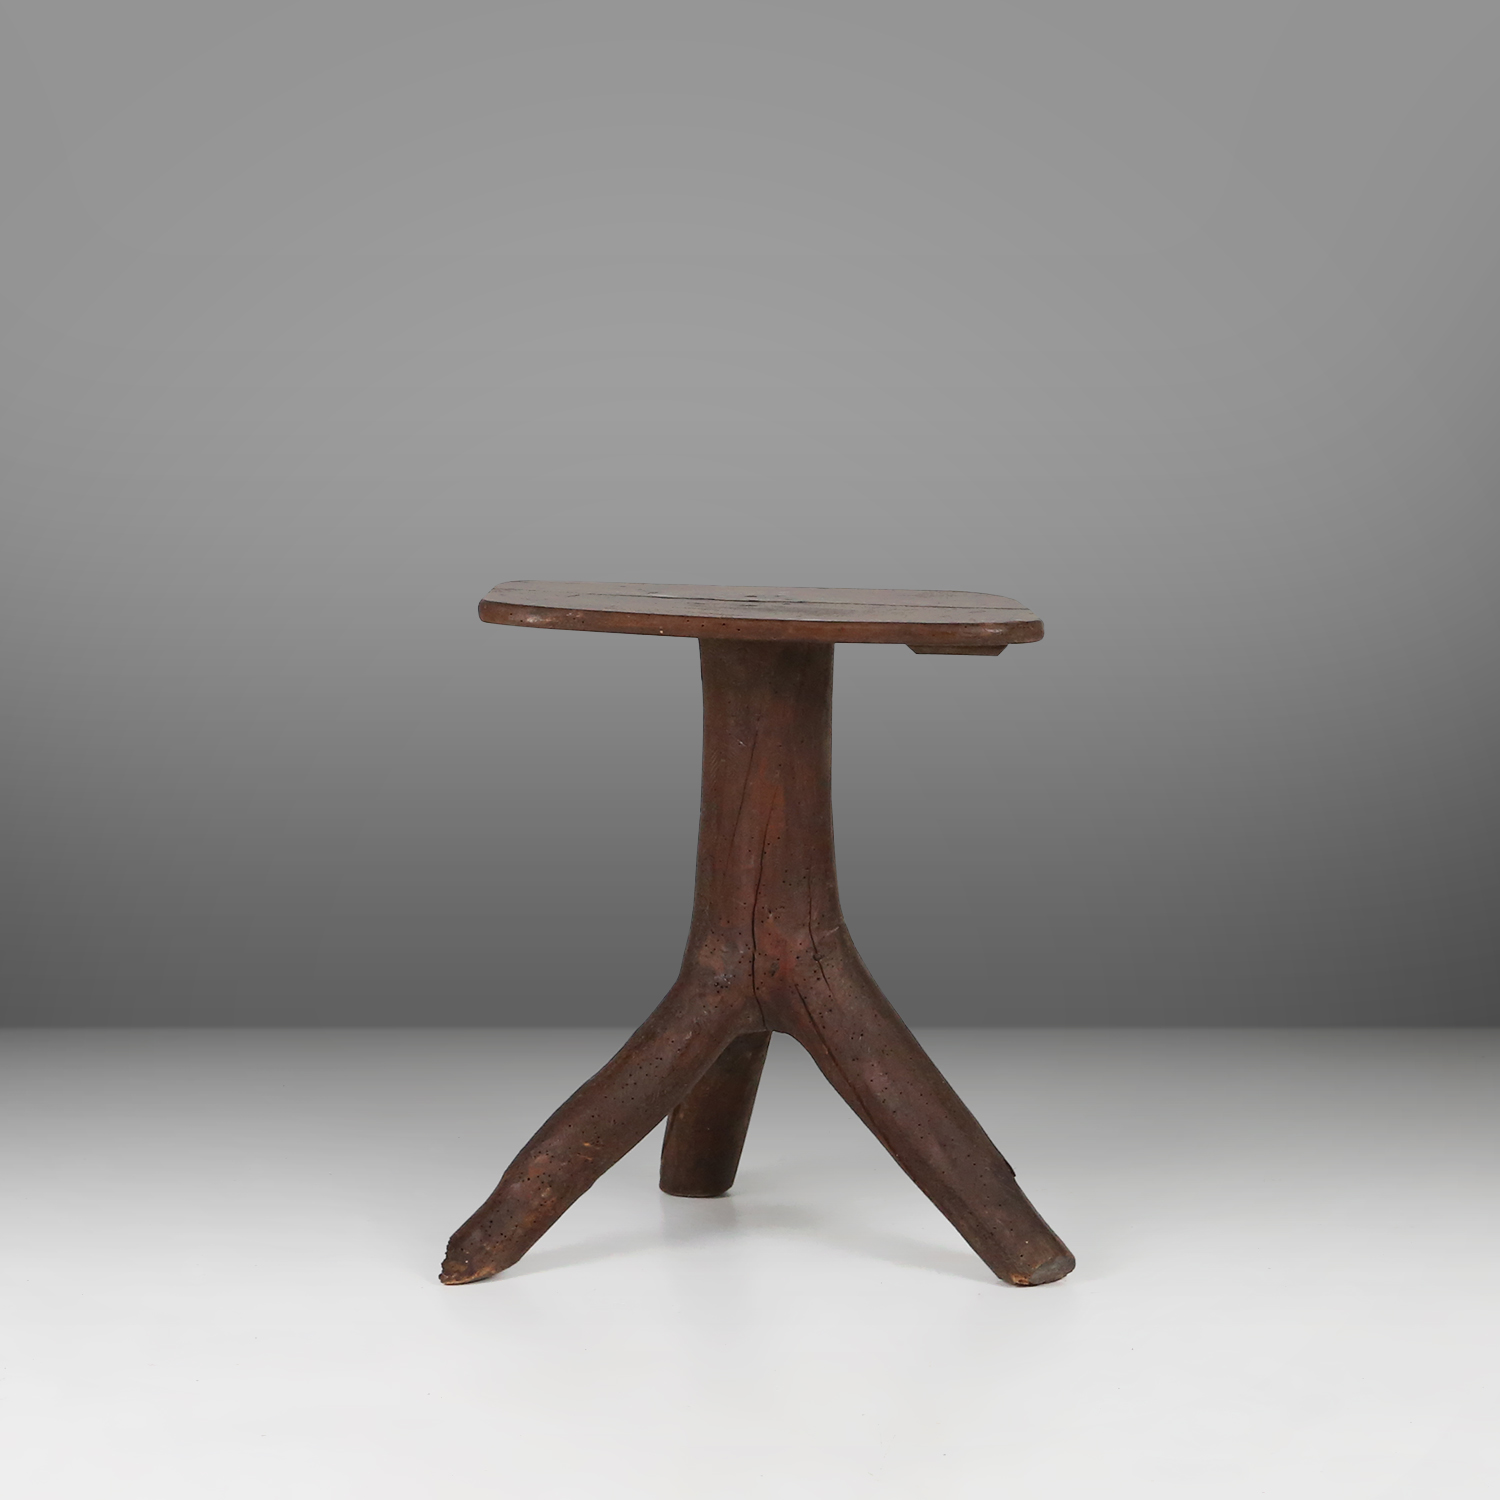 Rustic wooden stool with legs made of a tree branch, France, 1850thumbnail